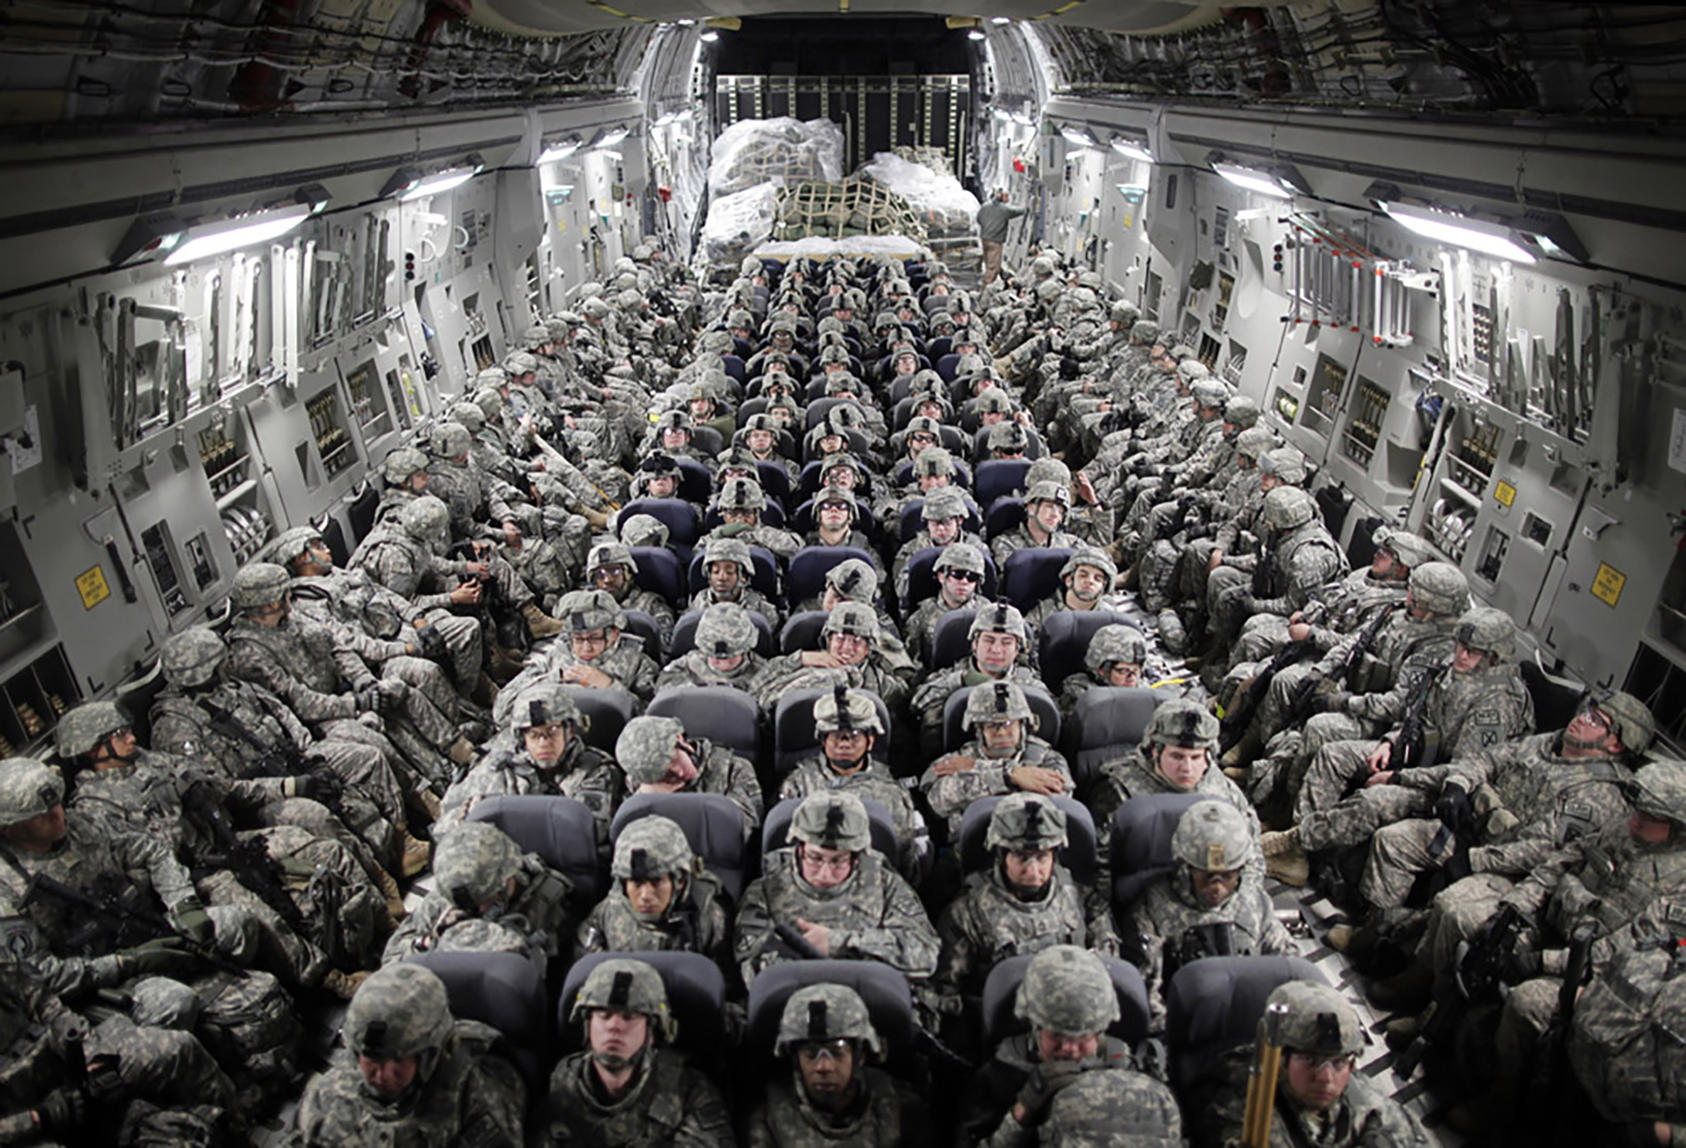 American soldiers on a transport plane that is about to land in Mazar-i-Sharif, in northern Afghanistan, April 5, 2010. (Damon Winter/The New York Times)